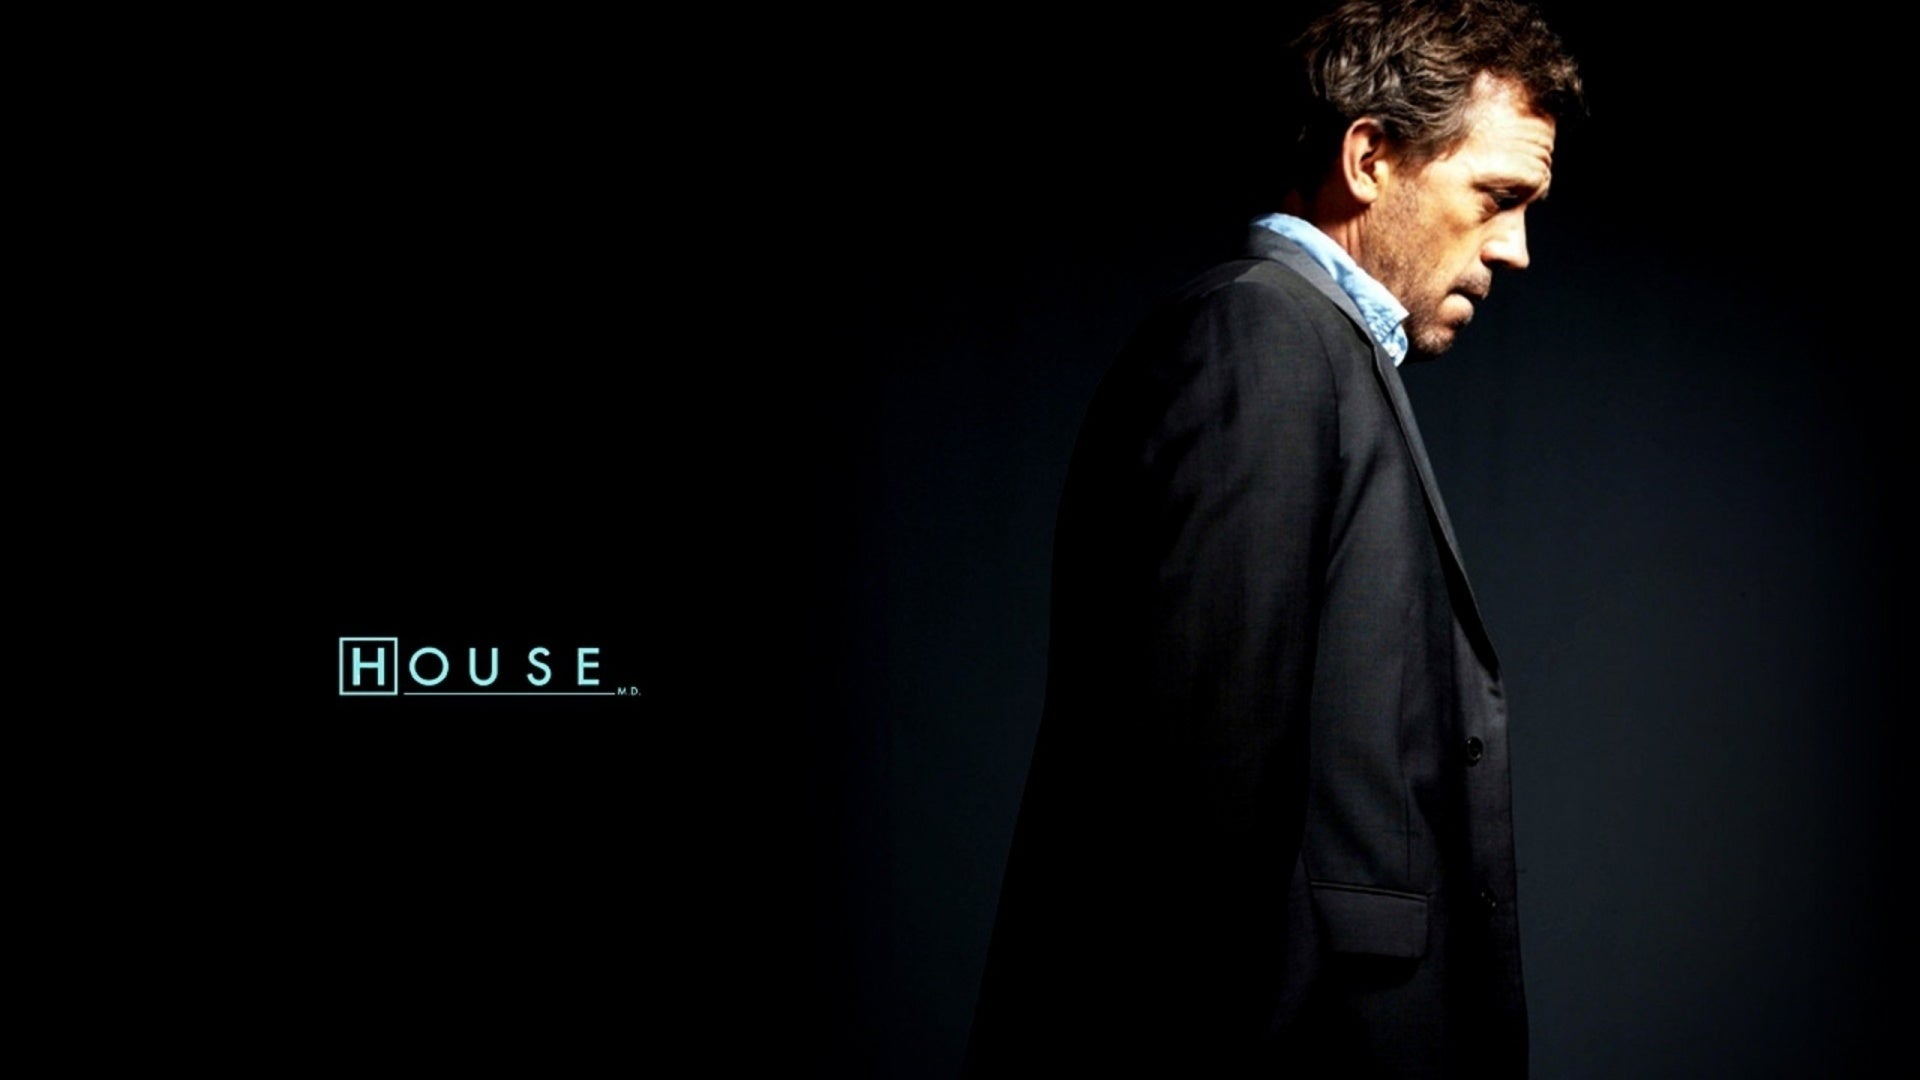 House M.D.: The Complete Collection - Seasons 1-8